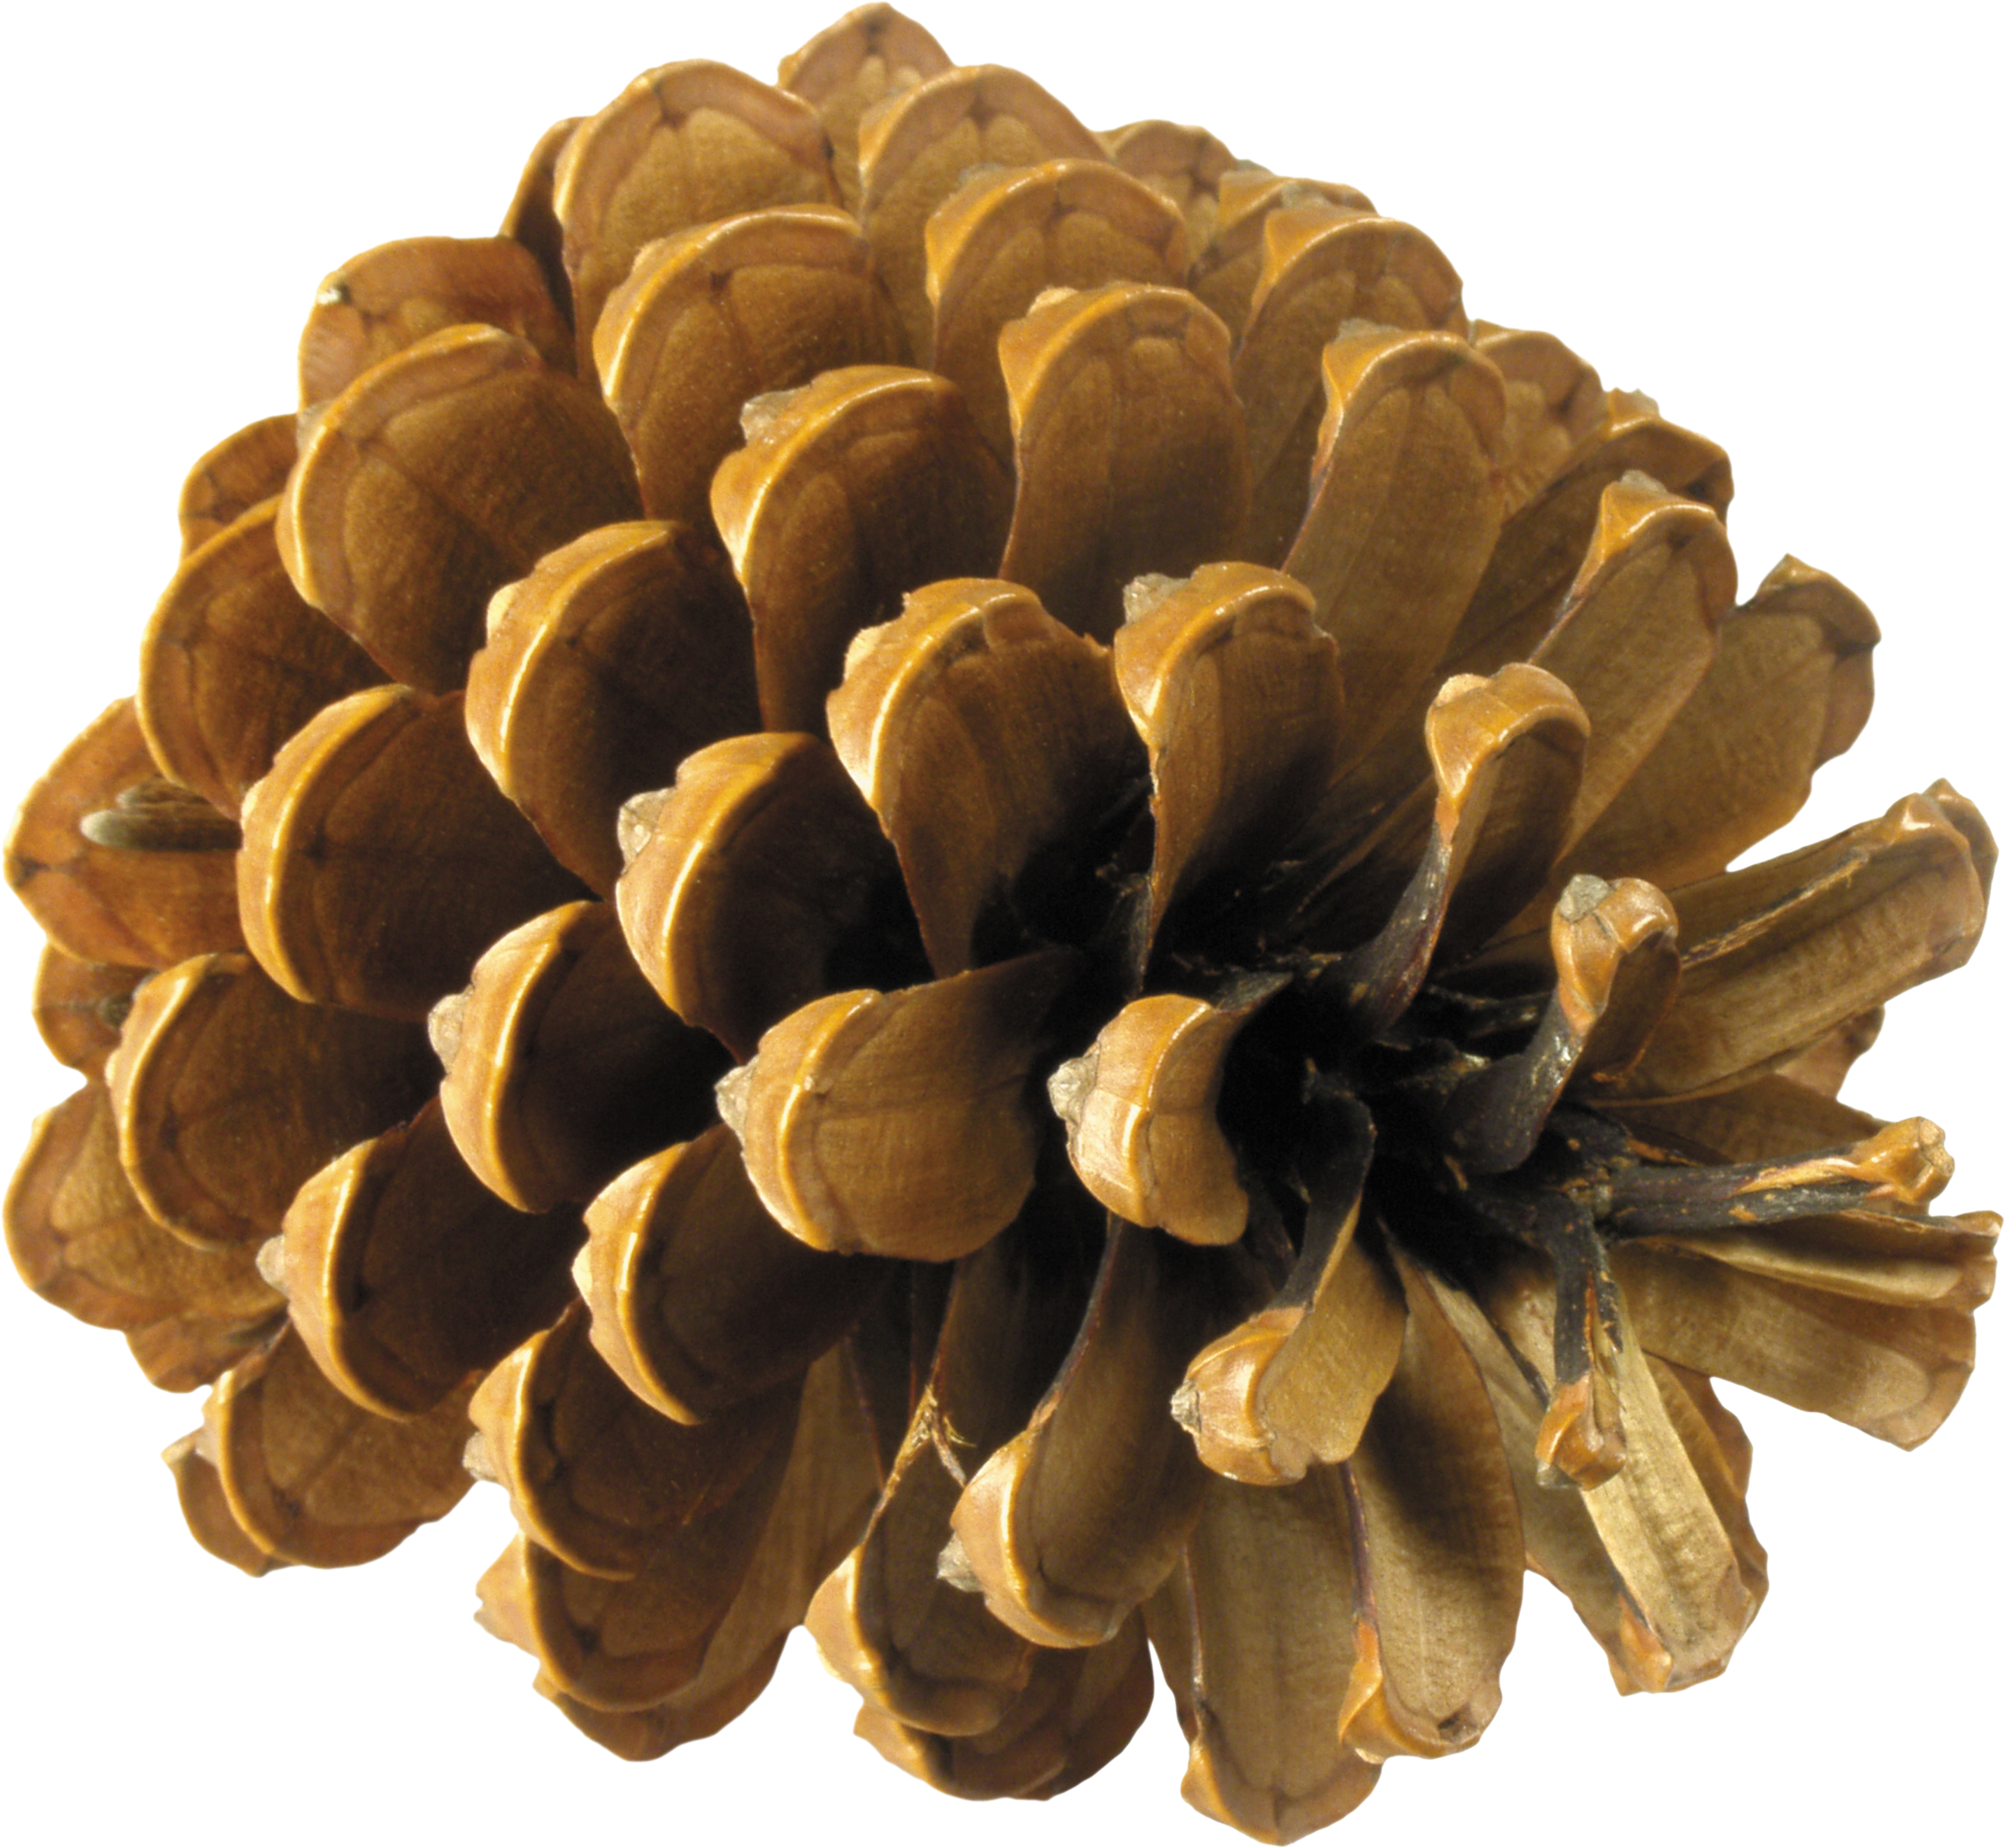 pinecone clipart branch brown